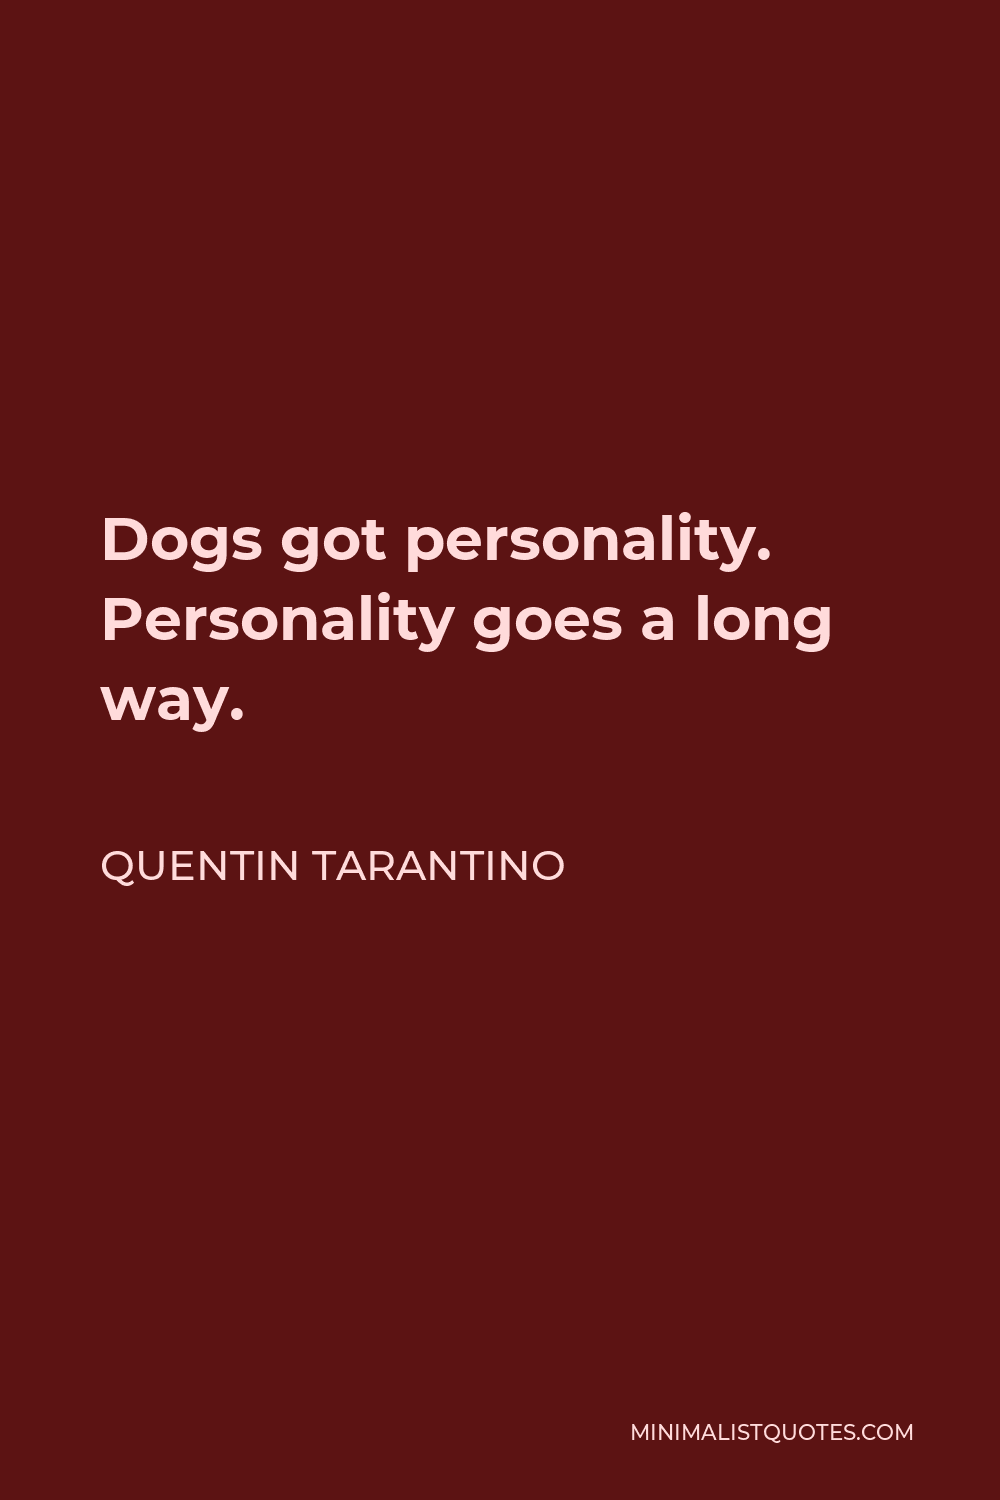 Quentin Tarantino Quote - Dogs got personality. Personality goes a long way.